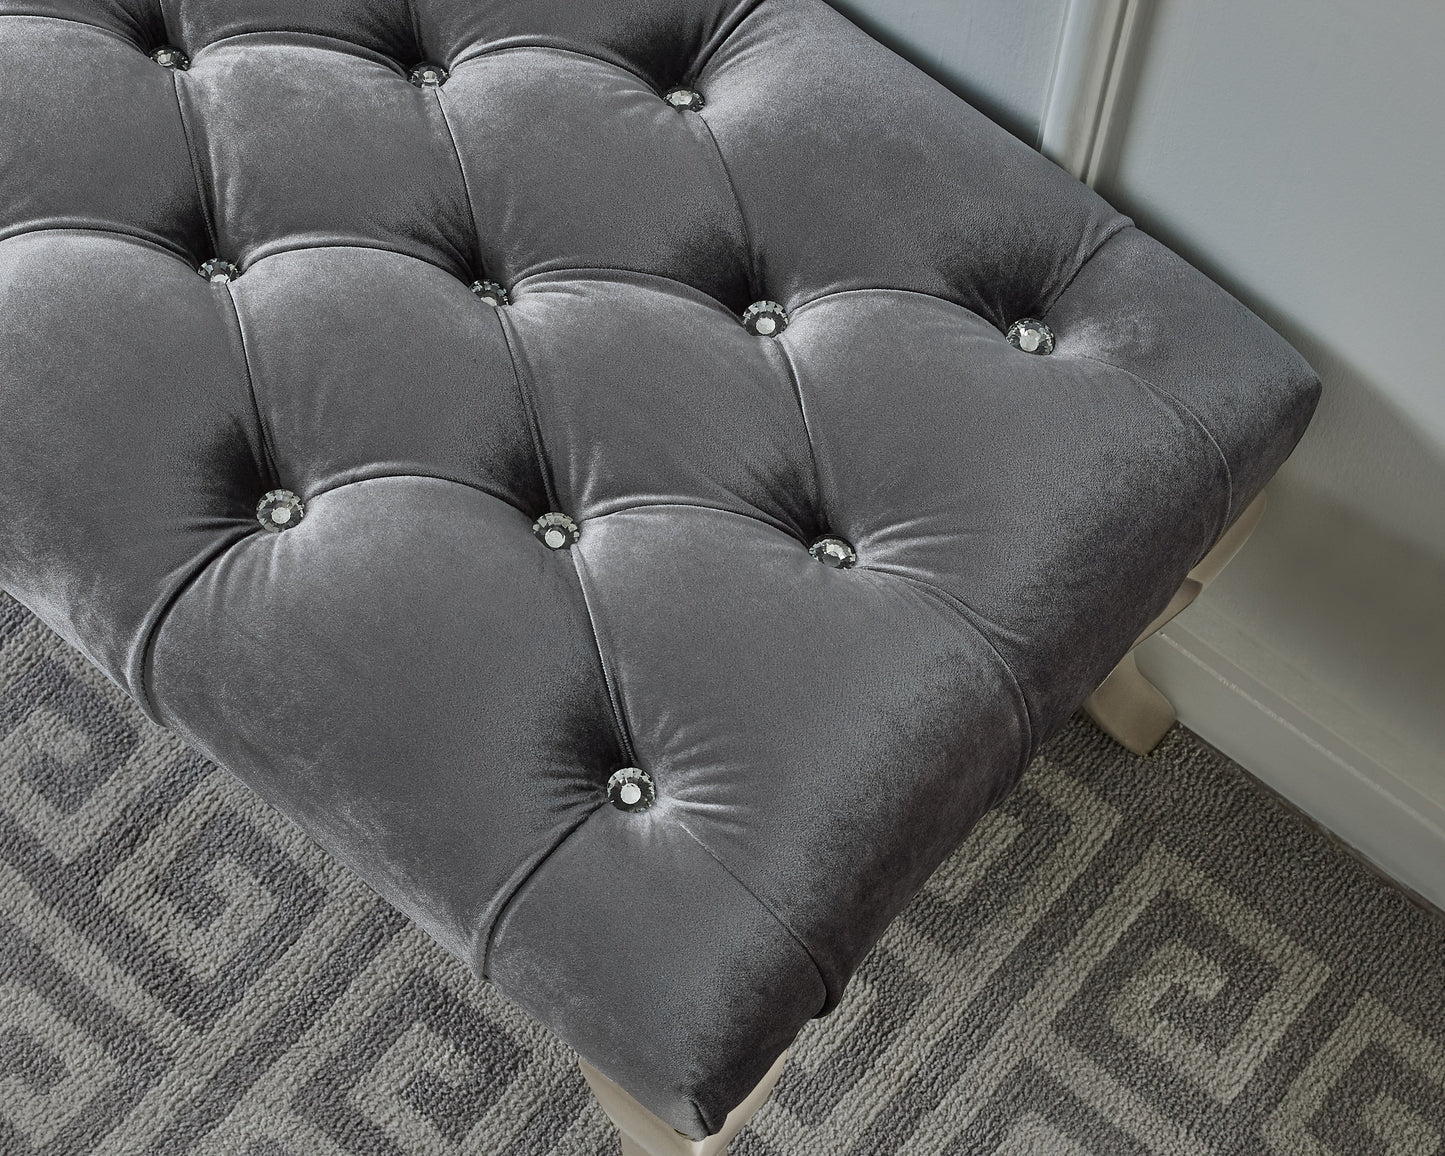 Decor Maxem Tufted Fabric Upholstered Seat with Nailhead Trim Bench, Gray